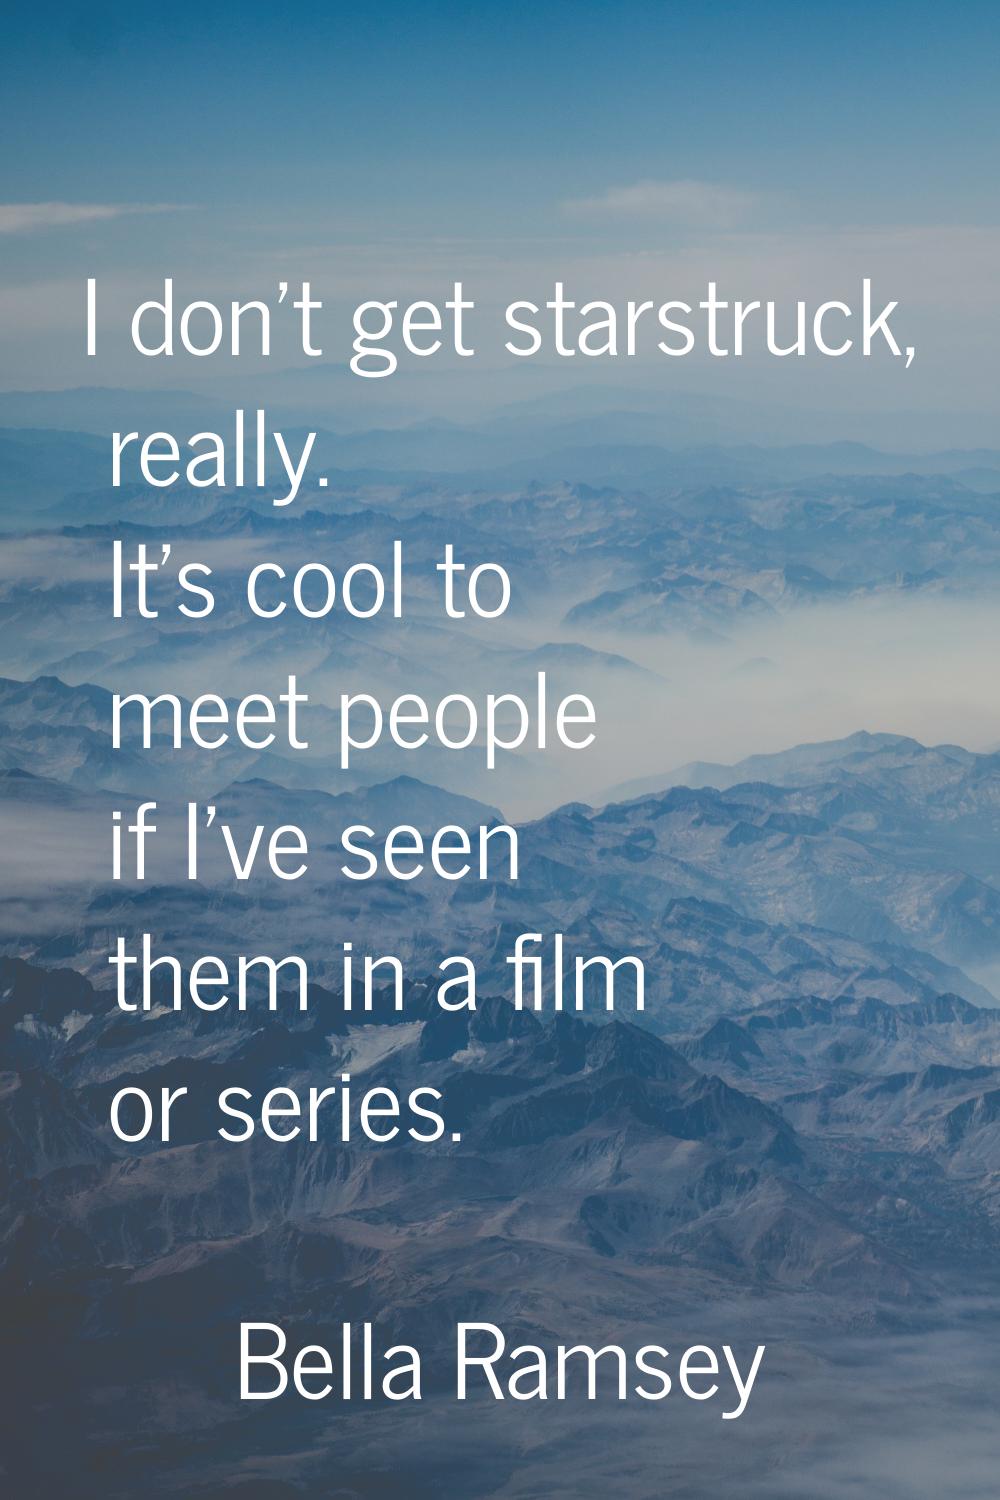 I don't get starstruck, really. It's cool to meet people if I've seen them in a film or series.